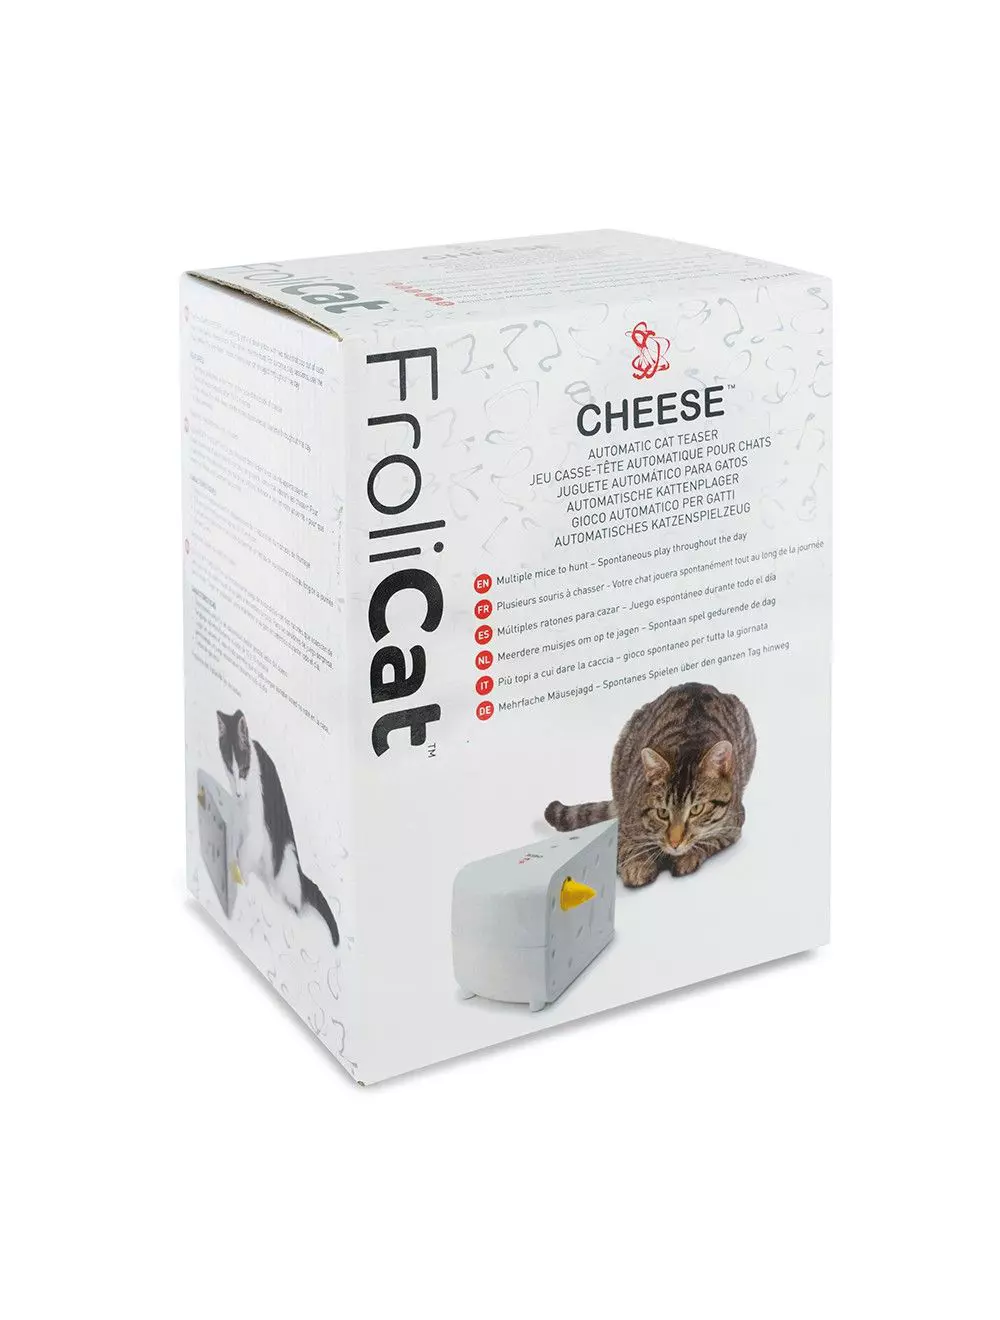 Petsafe Cheese Activity Toy